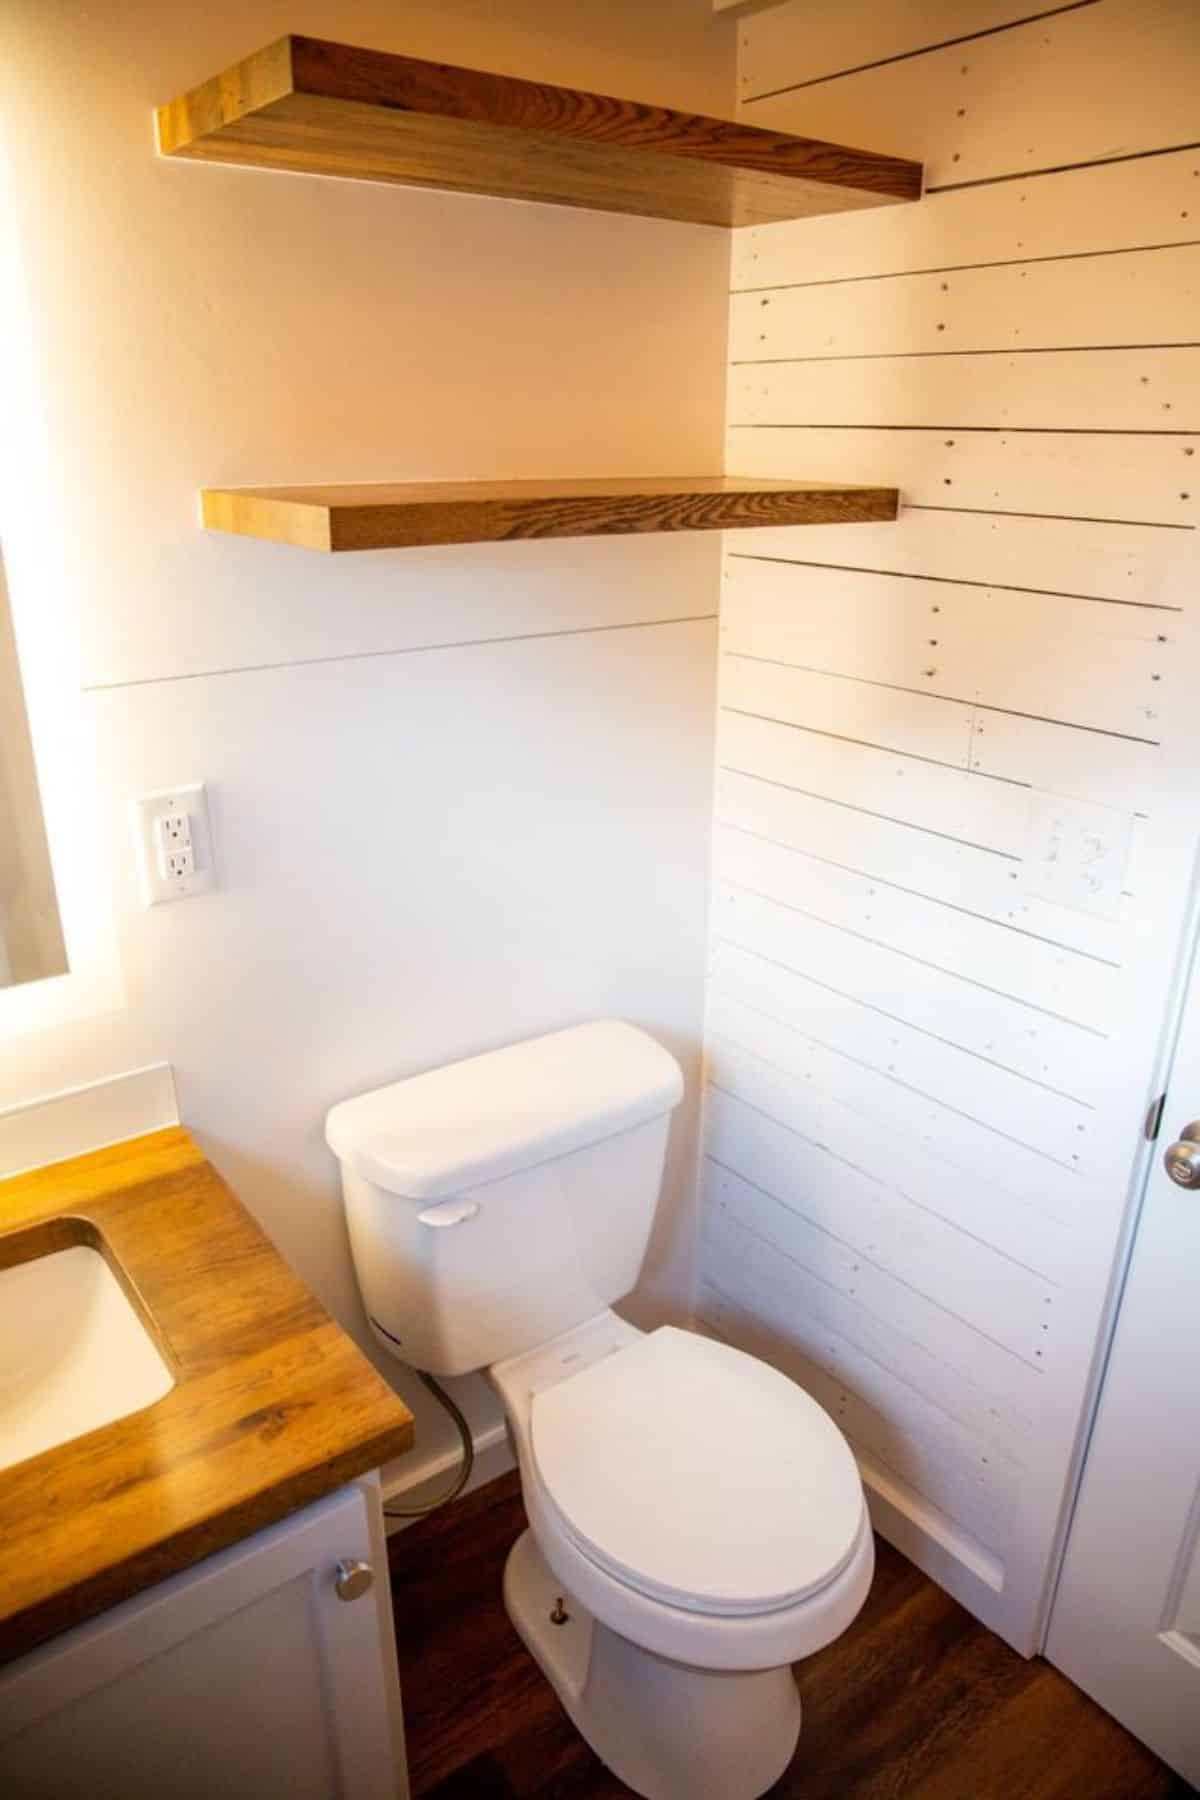 bathroom of 24’ tiny house has all the standard fittings